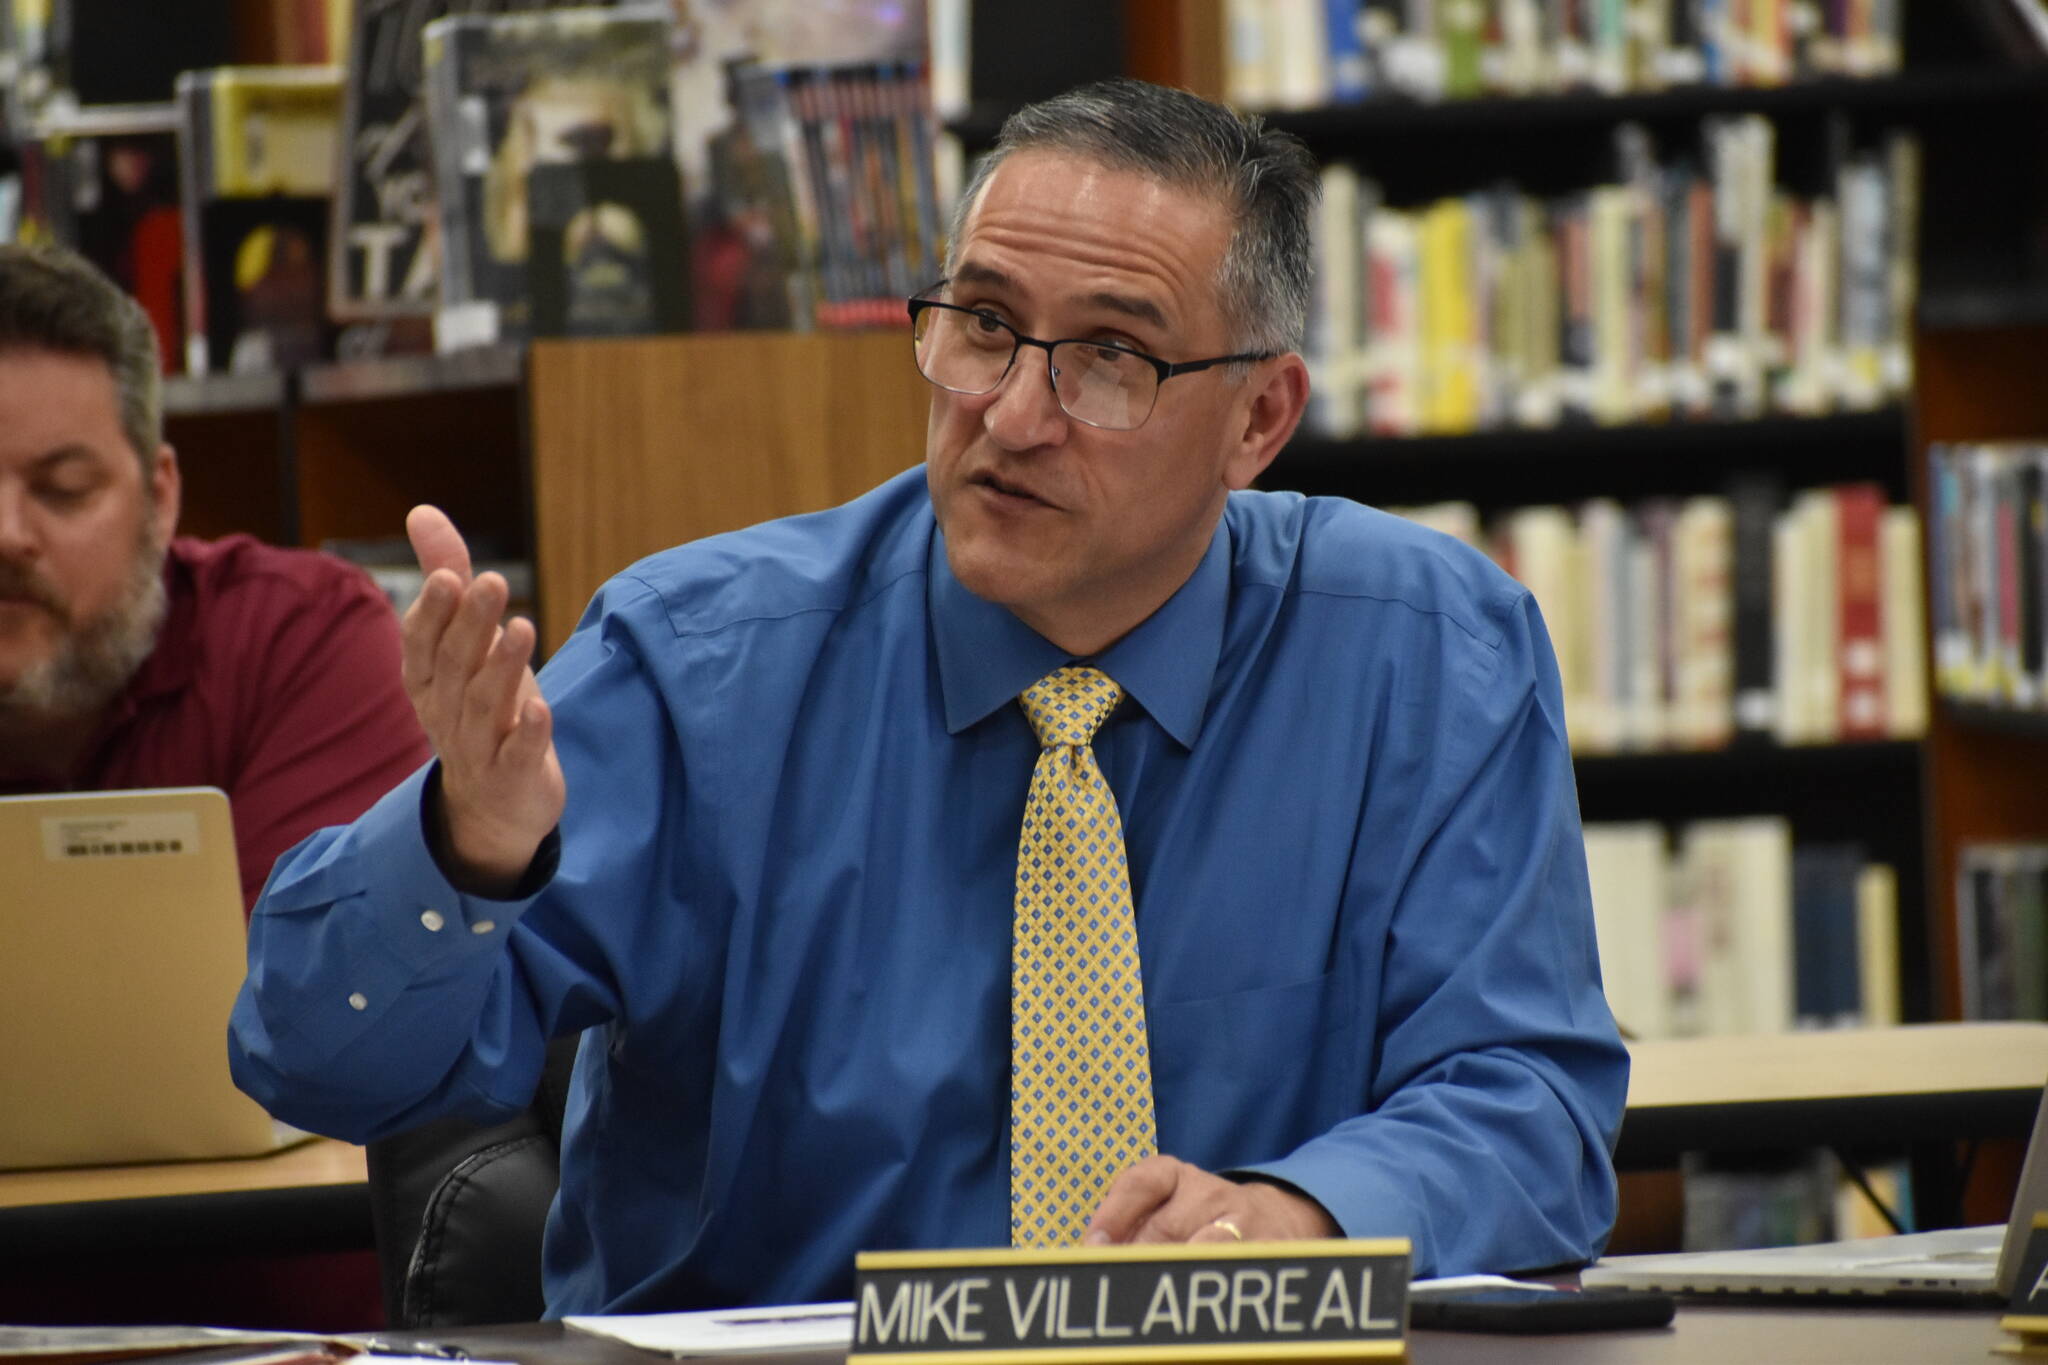 Hoquiam Superintendent Mike Villarreal addresses the audience at Thursday evening’s school board meeting. (Clayton Franke / The Daily World)